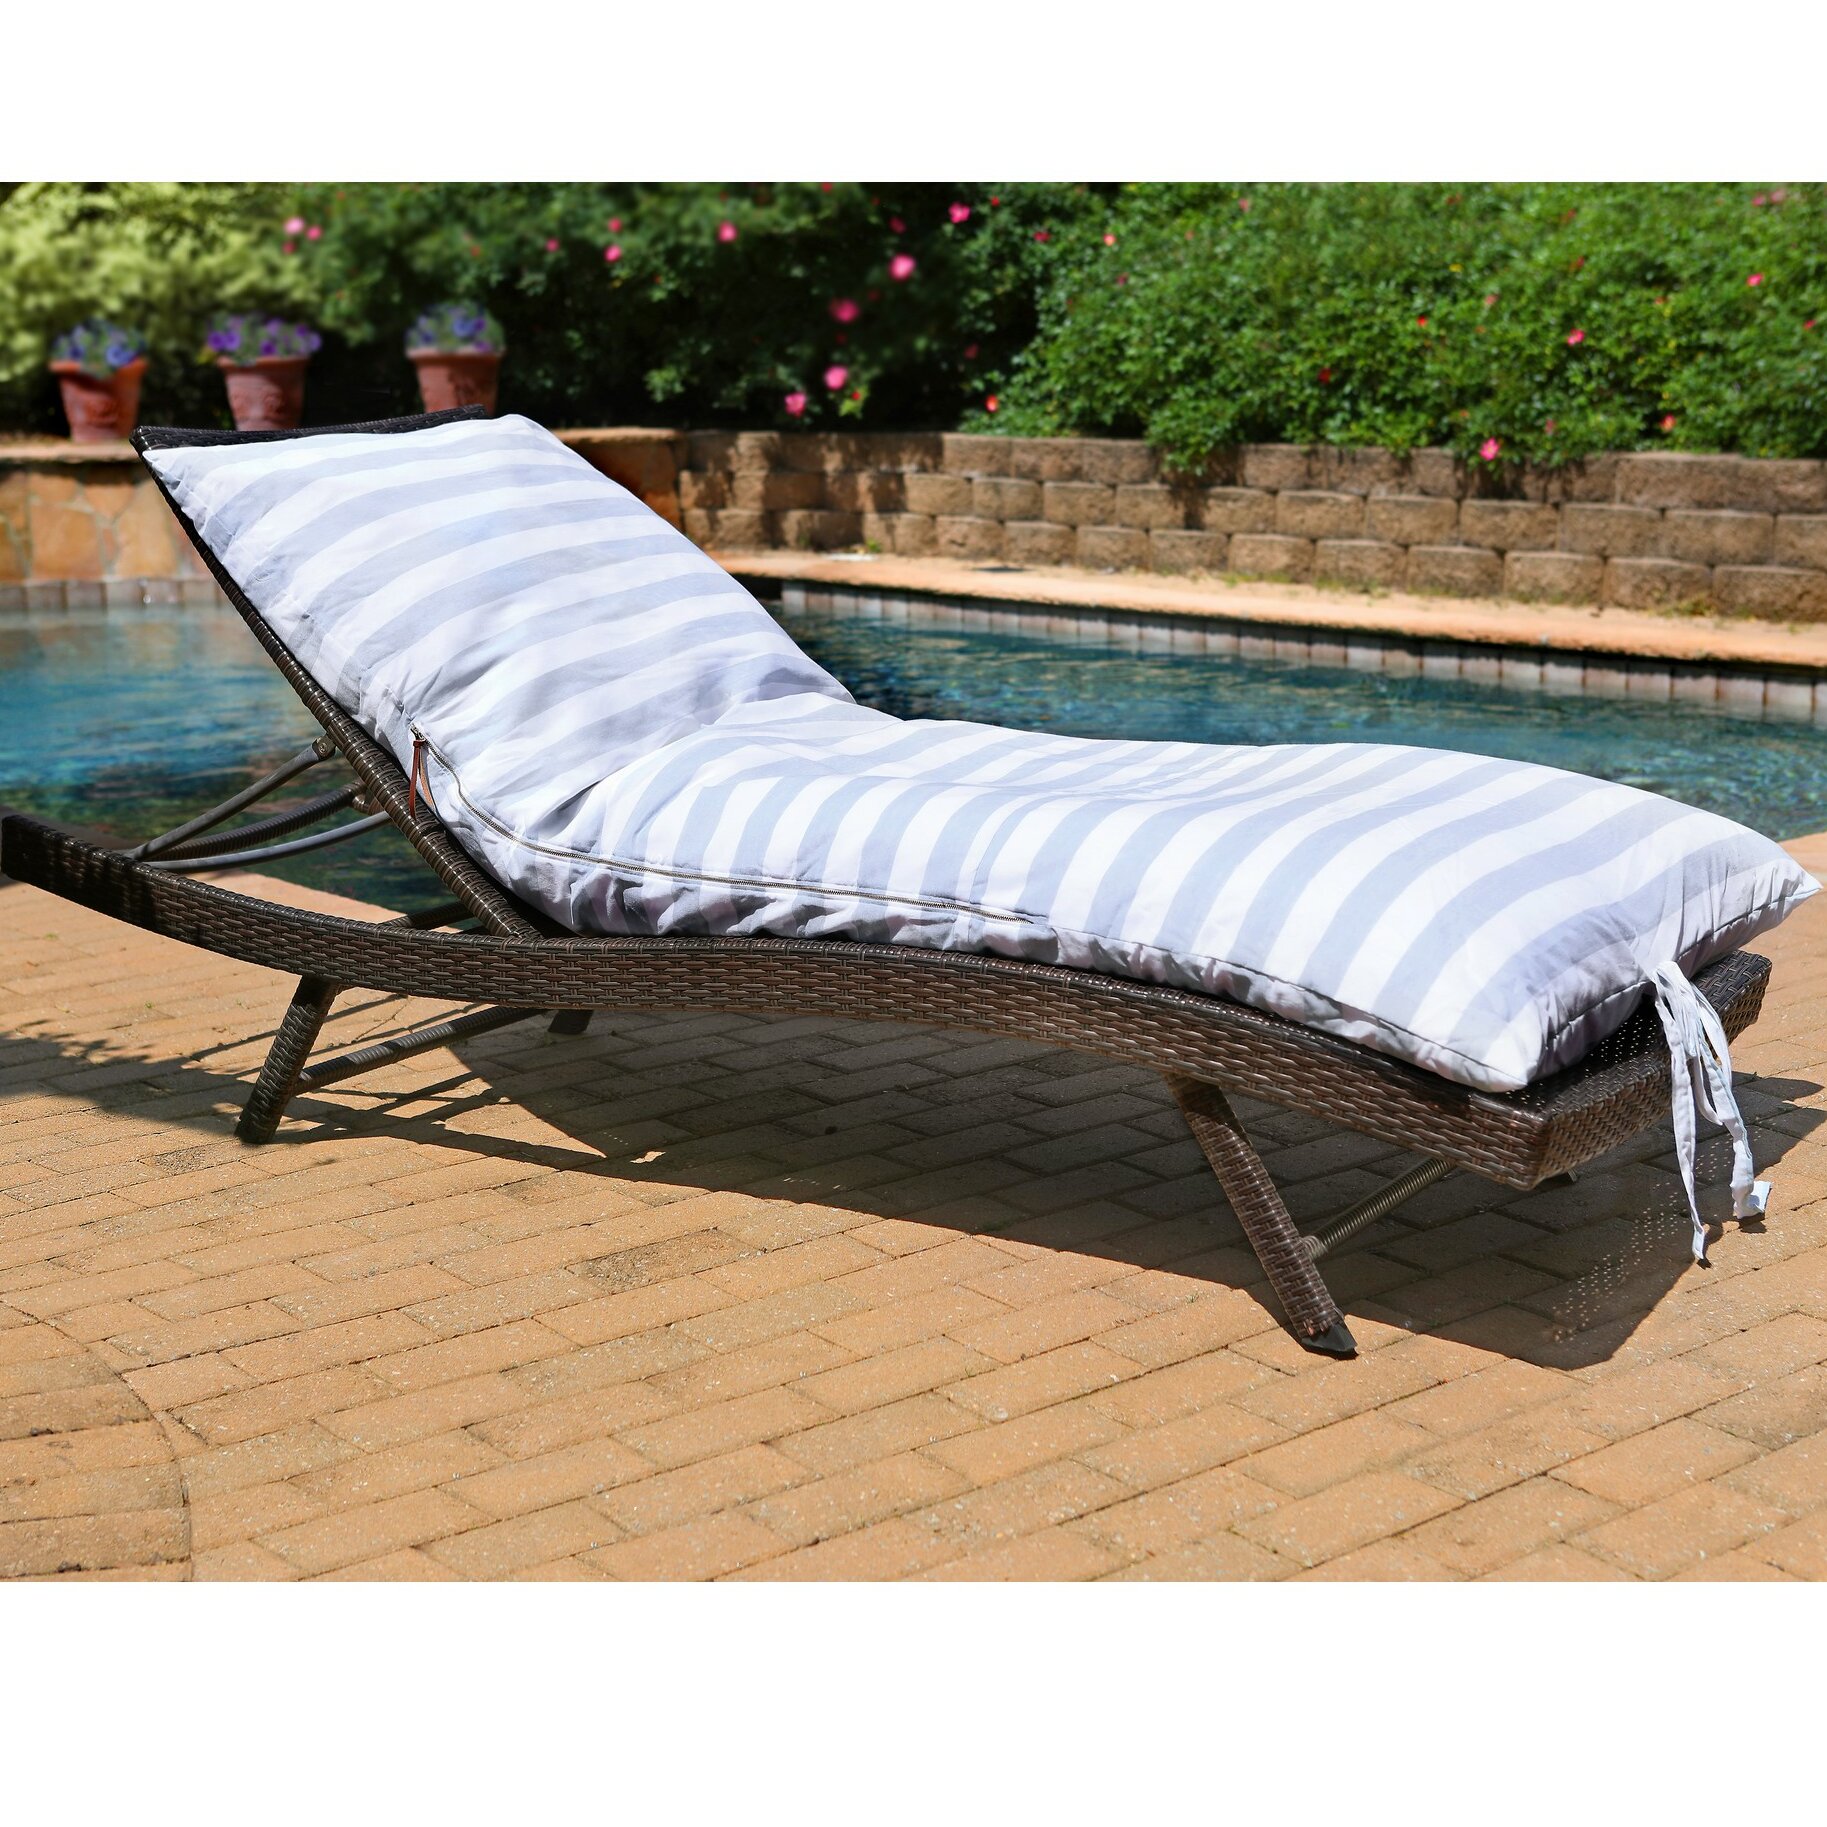 Chaise Lounge Chair Cushion Hinged Indoor/Outdoor Seating Padding Patio Garden